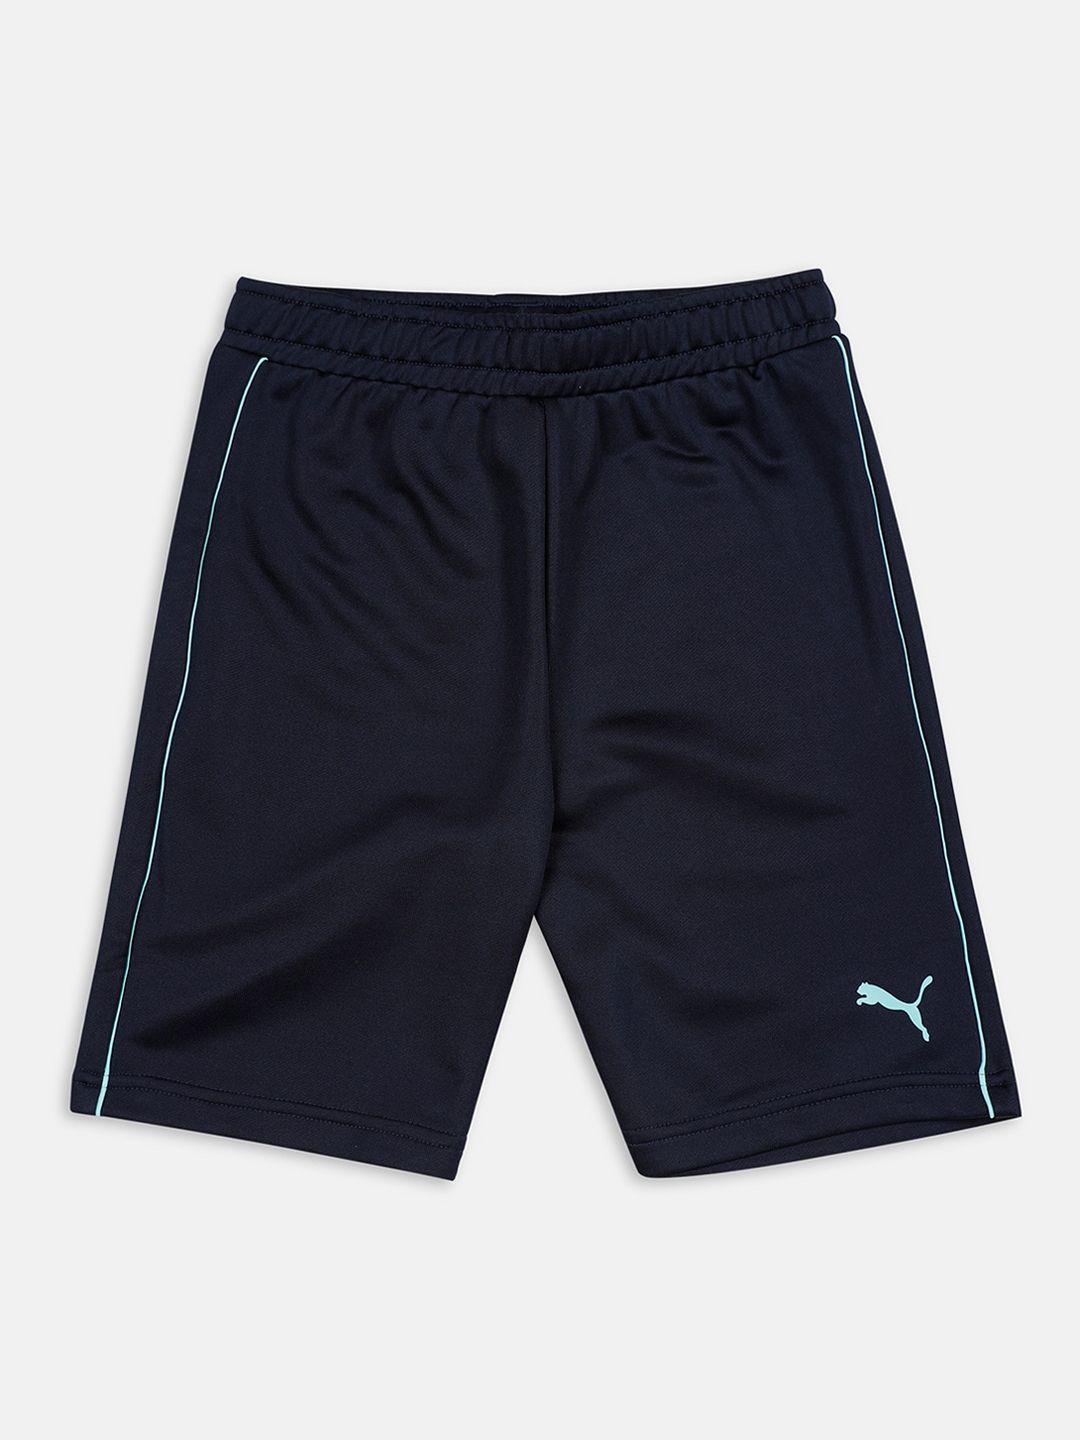 Puma Boys Cricket Solid Youth Knitted Sports Shorts